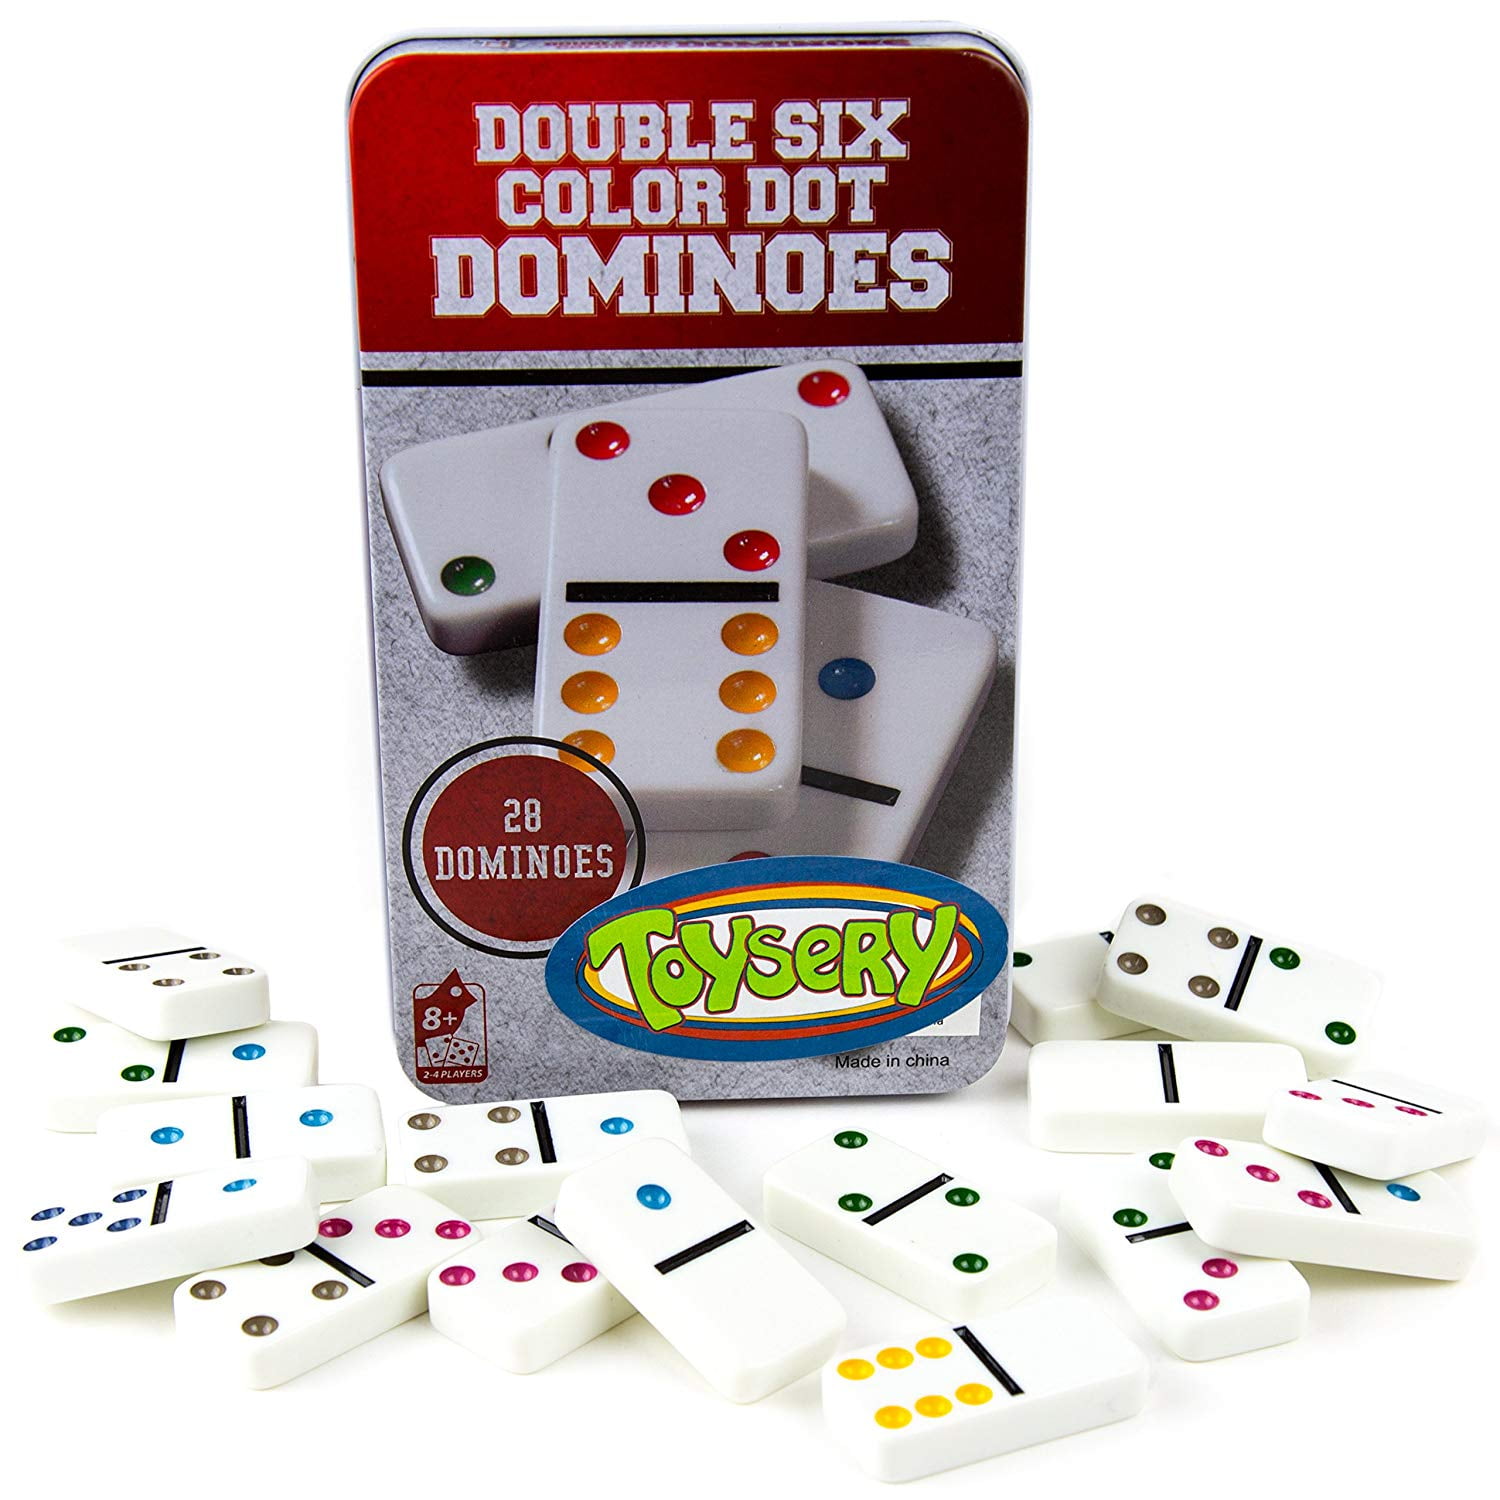 4 NEW DOMINO SETS DOUBLE SIX DOMINOES 28 PIECES PER SET WITH WOOD BOX 